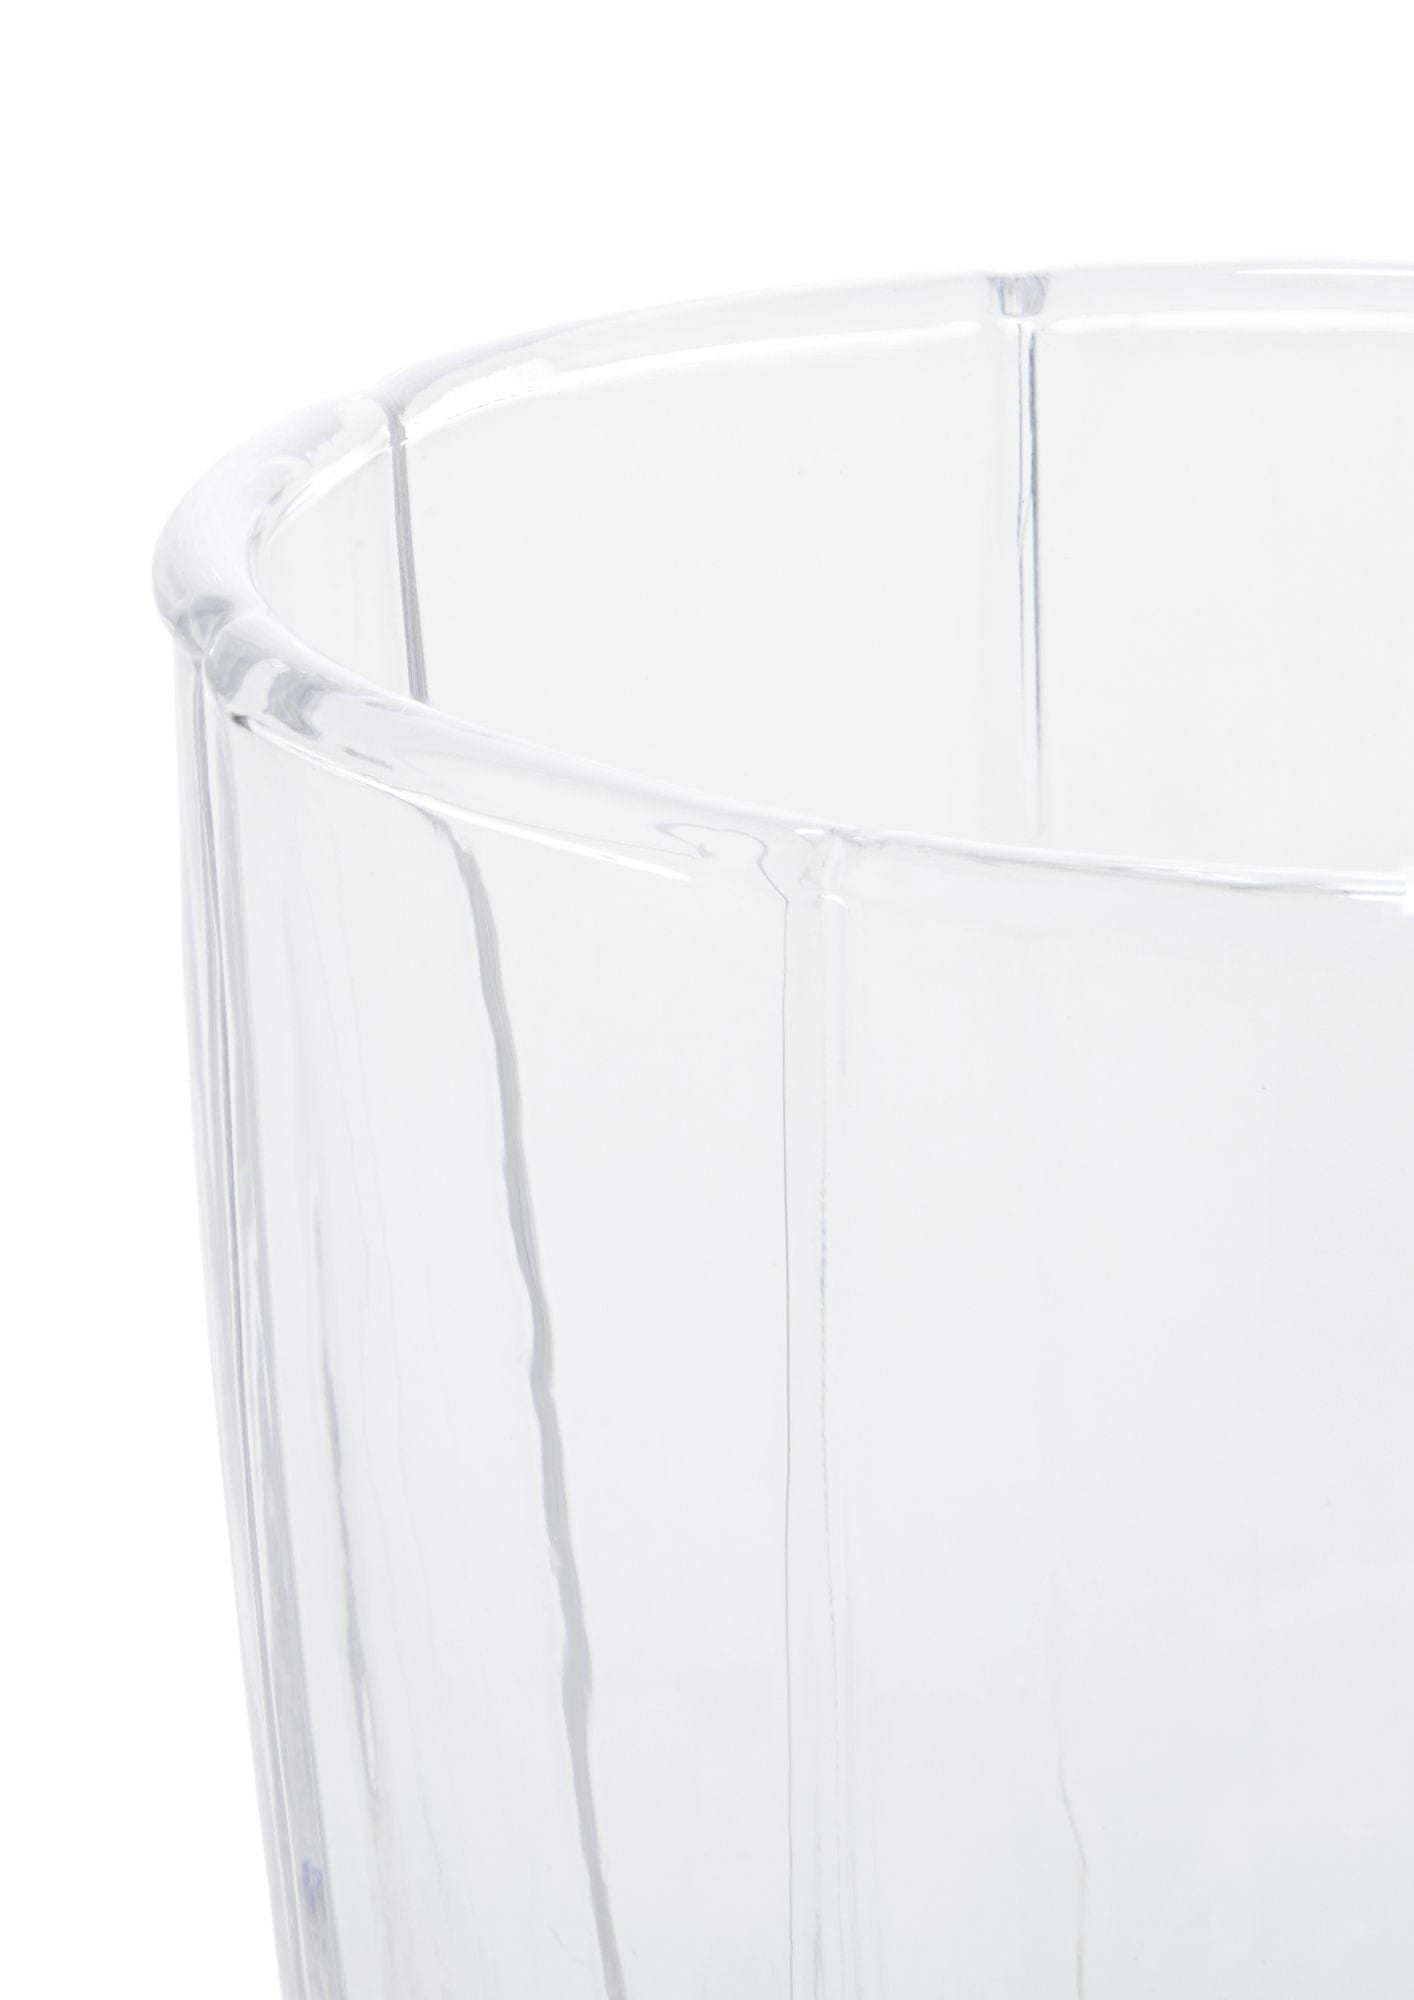 Holmegaard Lily Water Glass Set Of 2 320 Ml, Clear